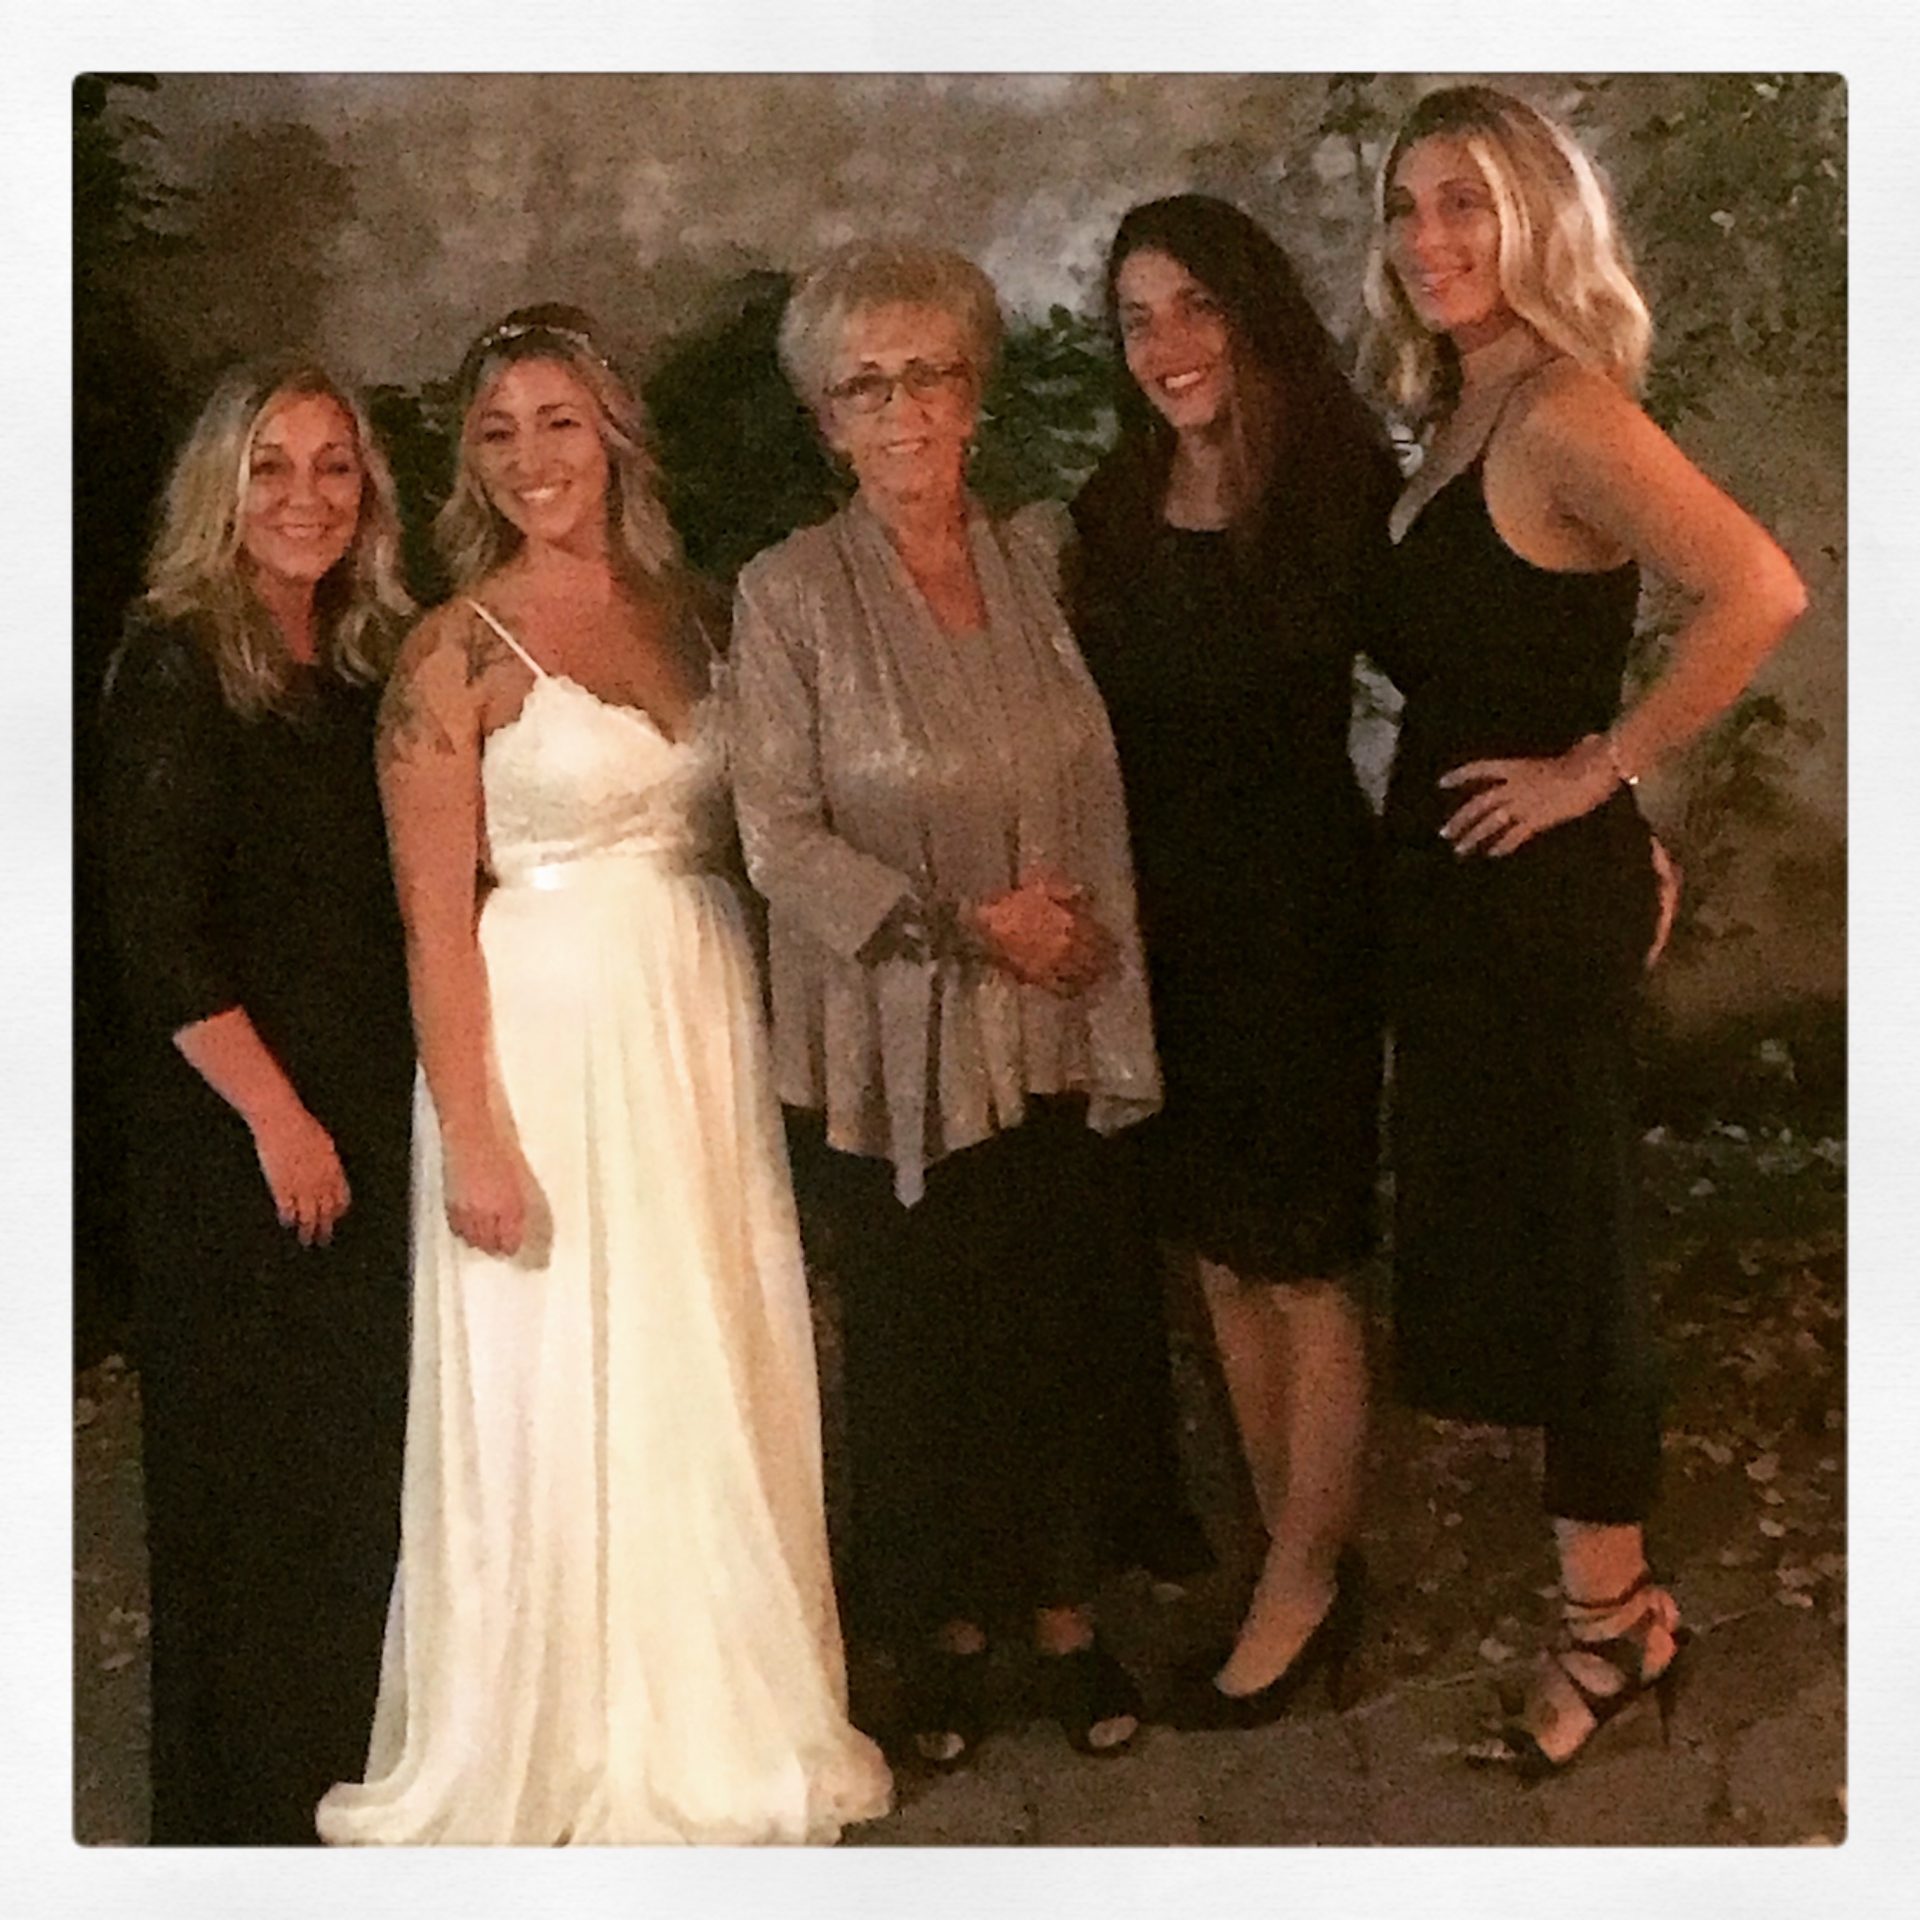 The OGs at Alicia’s wedding <br />
I will forever love you